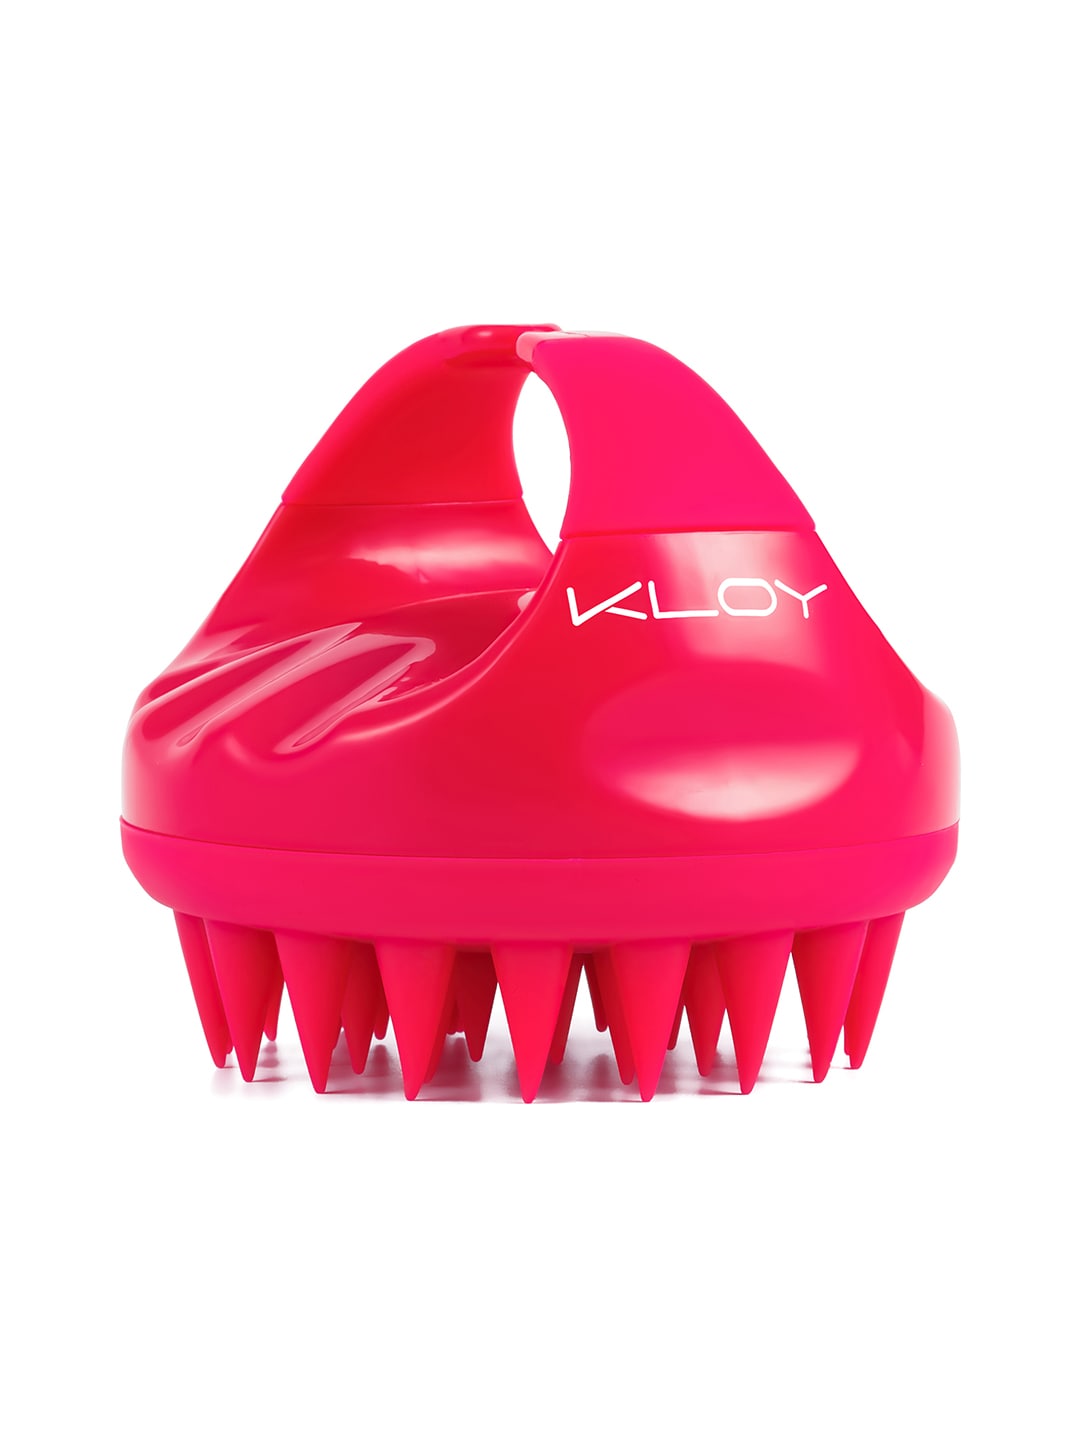 KLOY Red Hair Scalp Massager Exfoliator Shampoo Brush with Soft Silicone Bristles Price in India